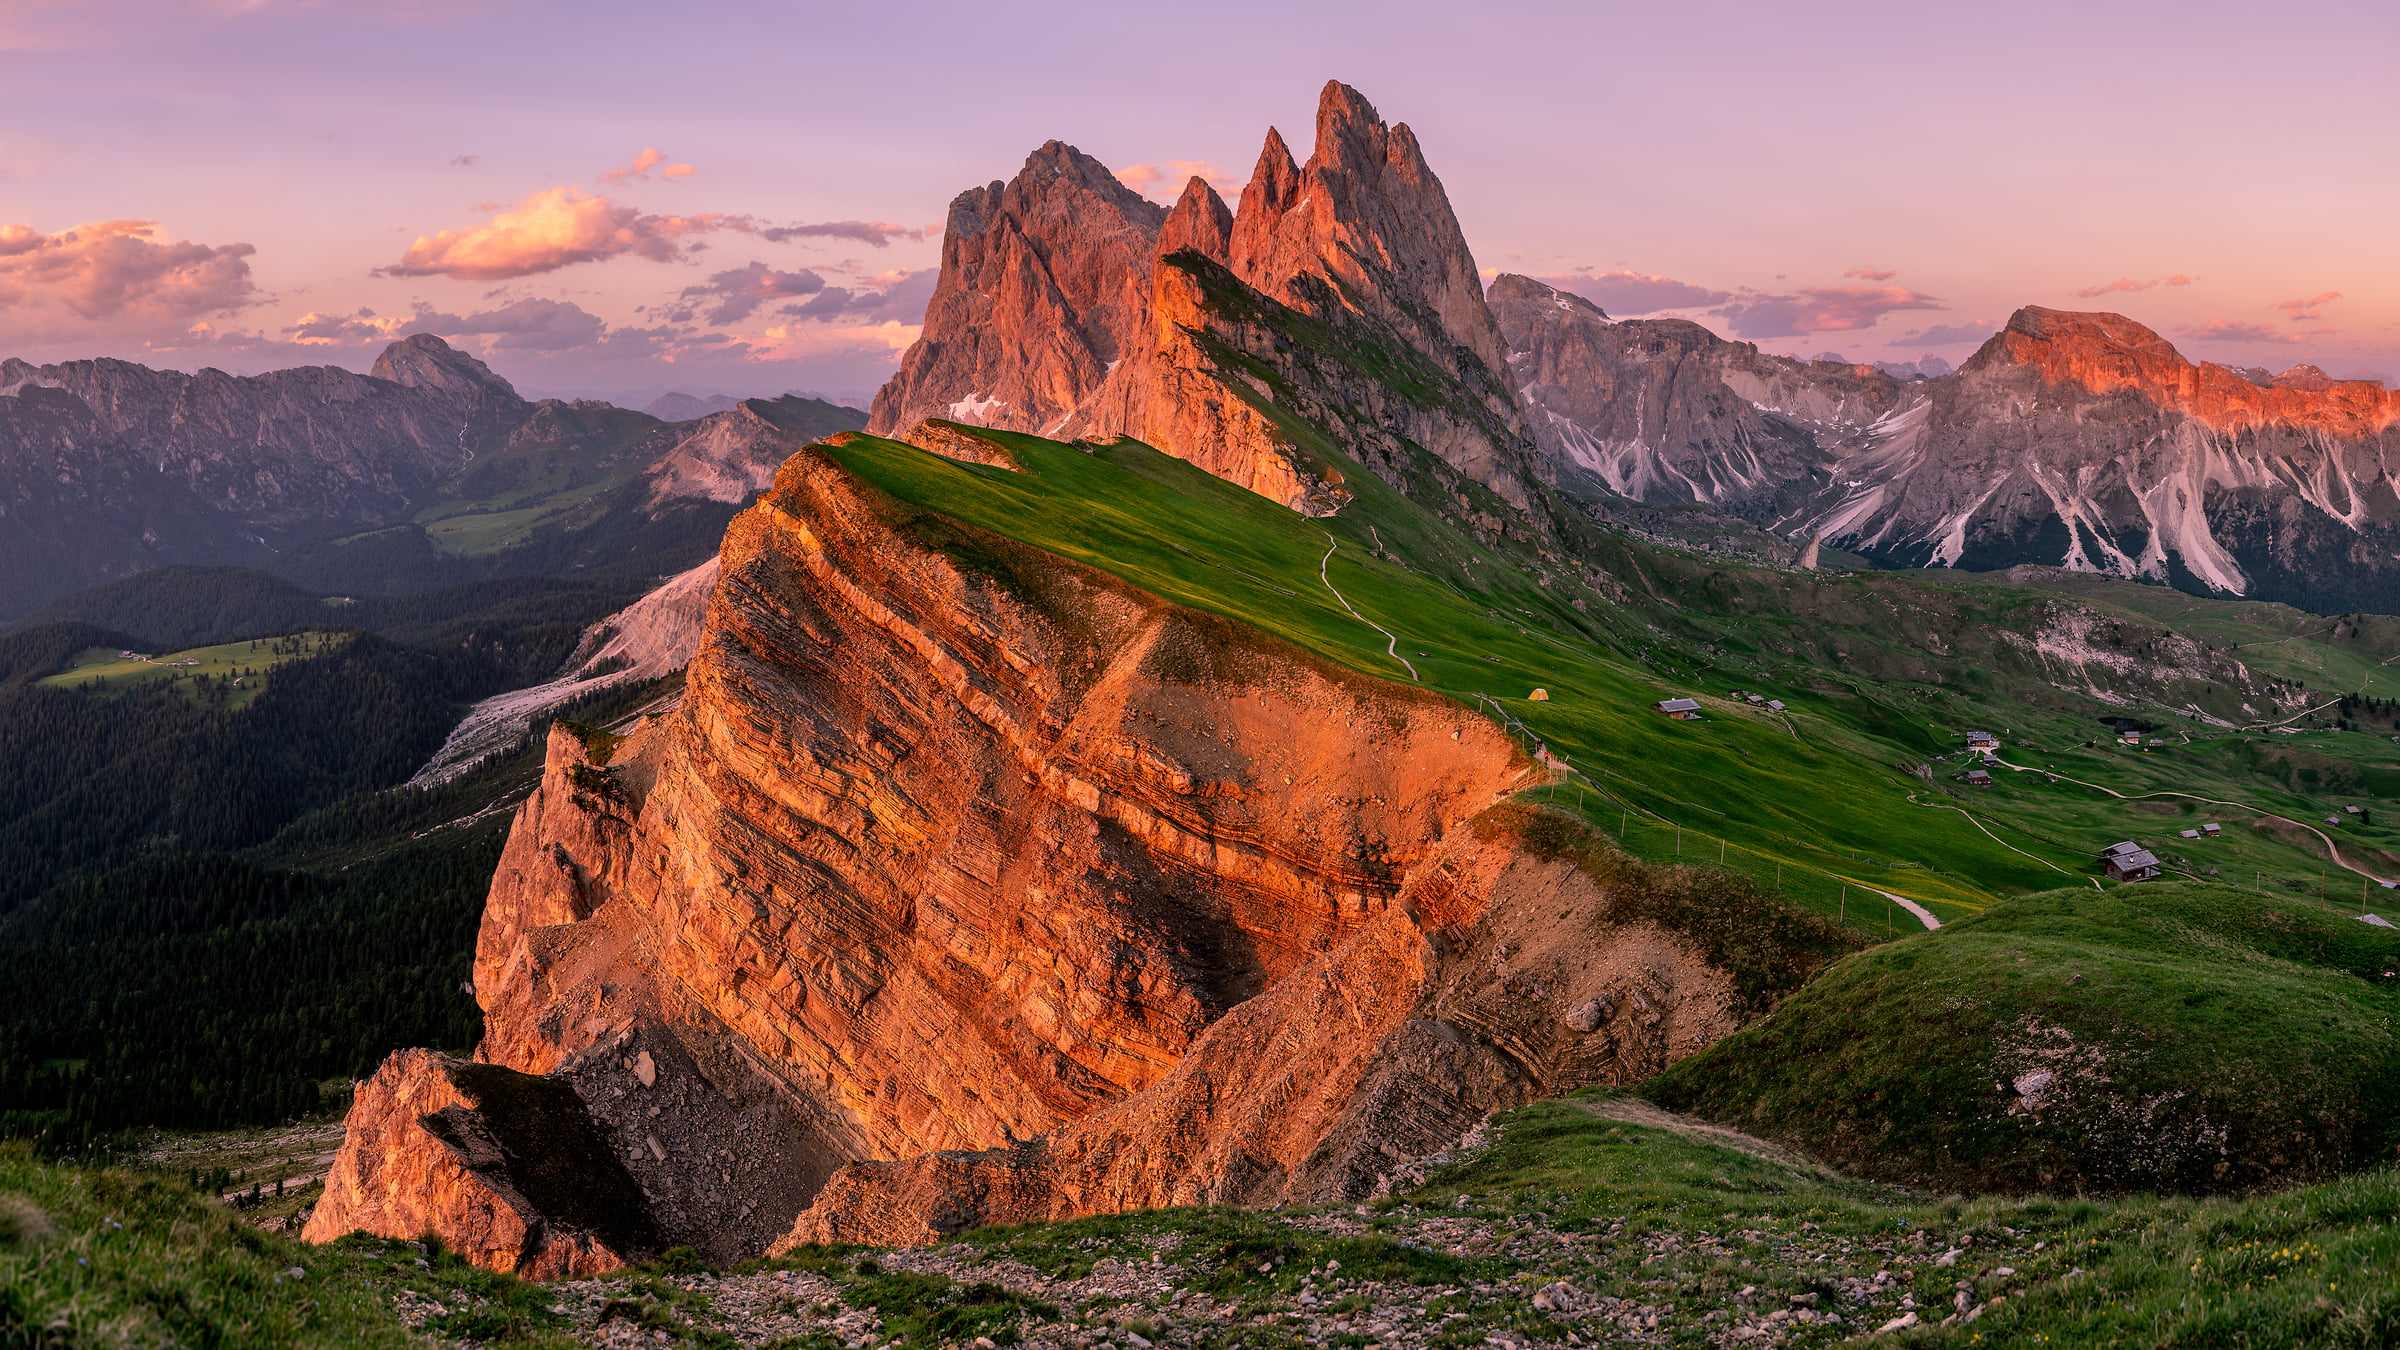 376 megapixels! A very high resolution, large-format VAST photo print of a landscape at sunset; landscape photograph created by Tim Shields in Seceda, Santa Cristina Valgardena, Italy.